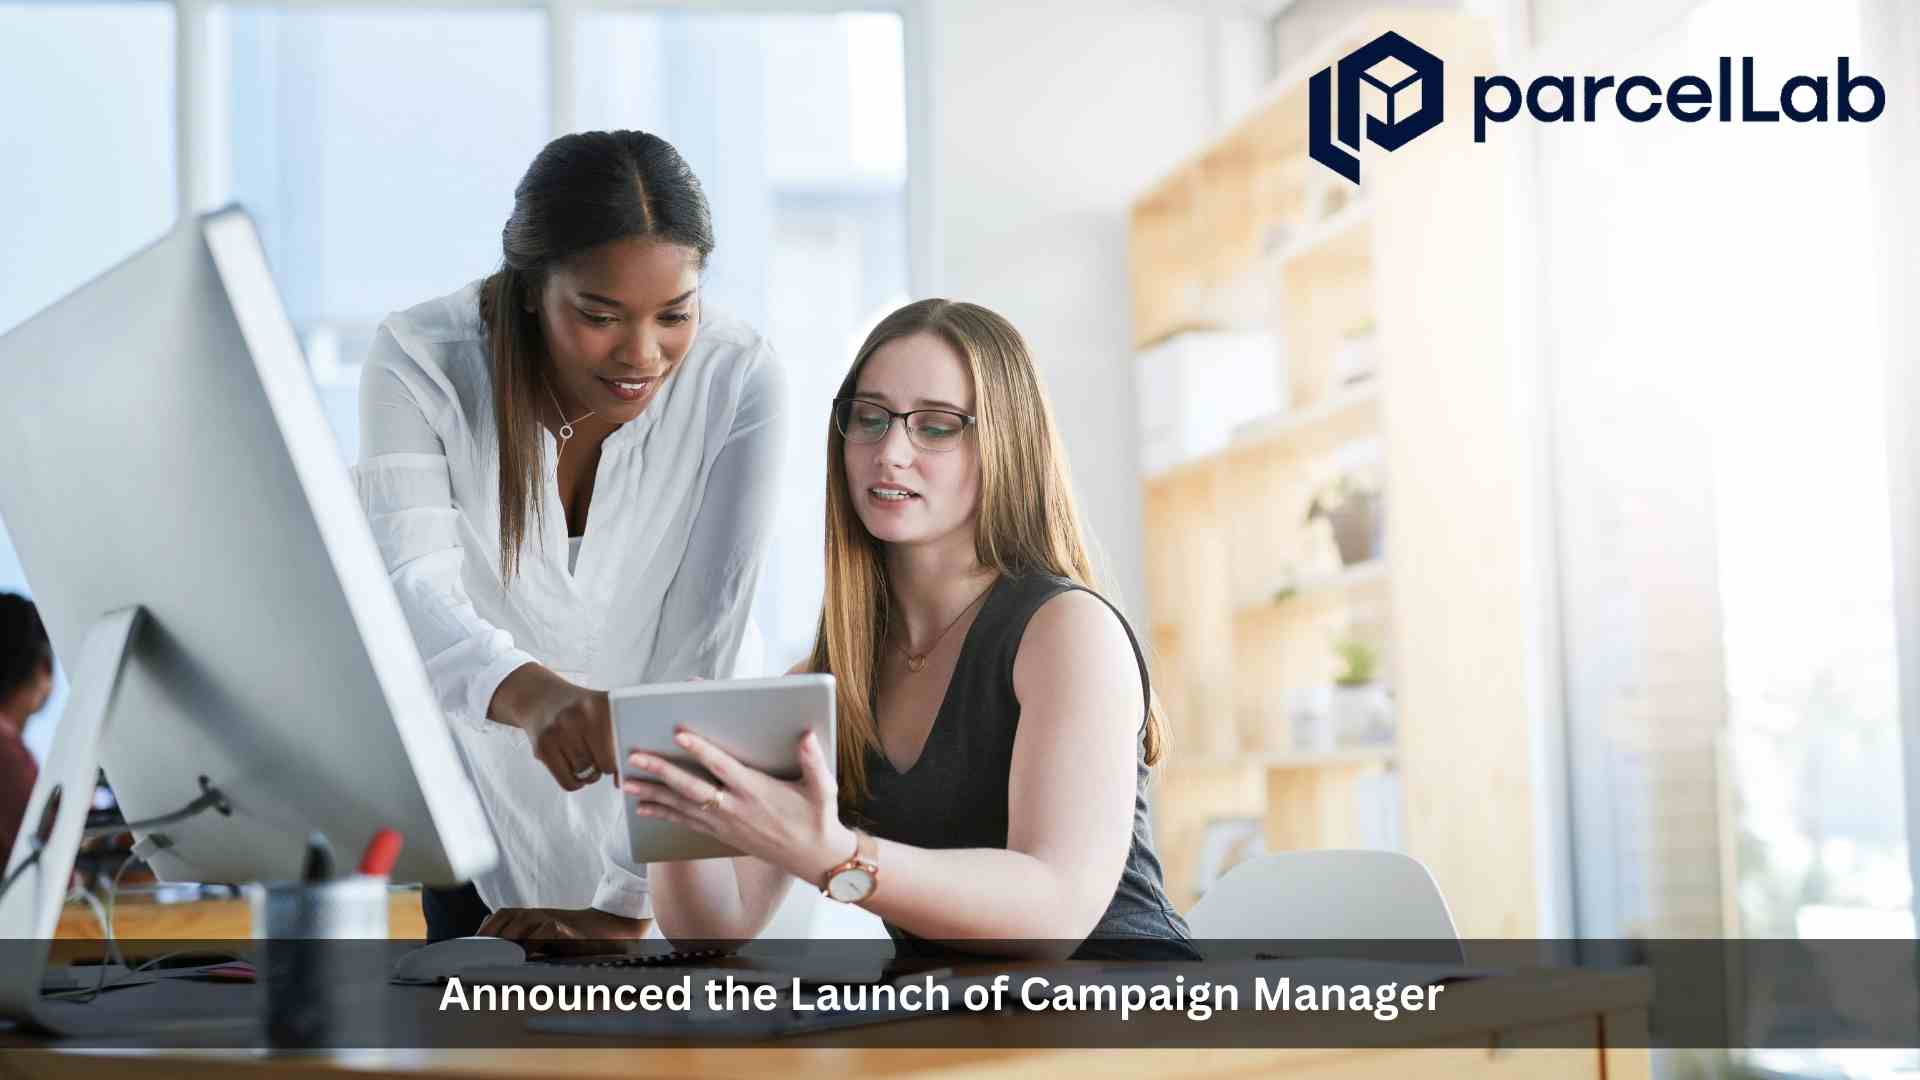 parcelLab Launches Campaign Manager to Empower Personalized Post-Purchase Customer Journeys